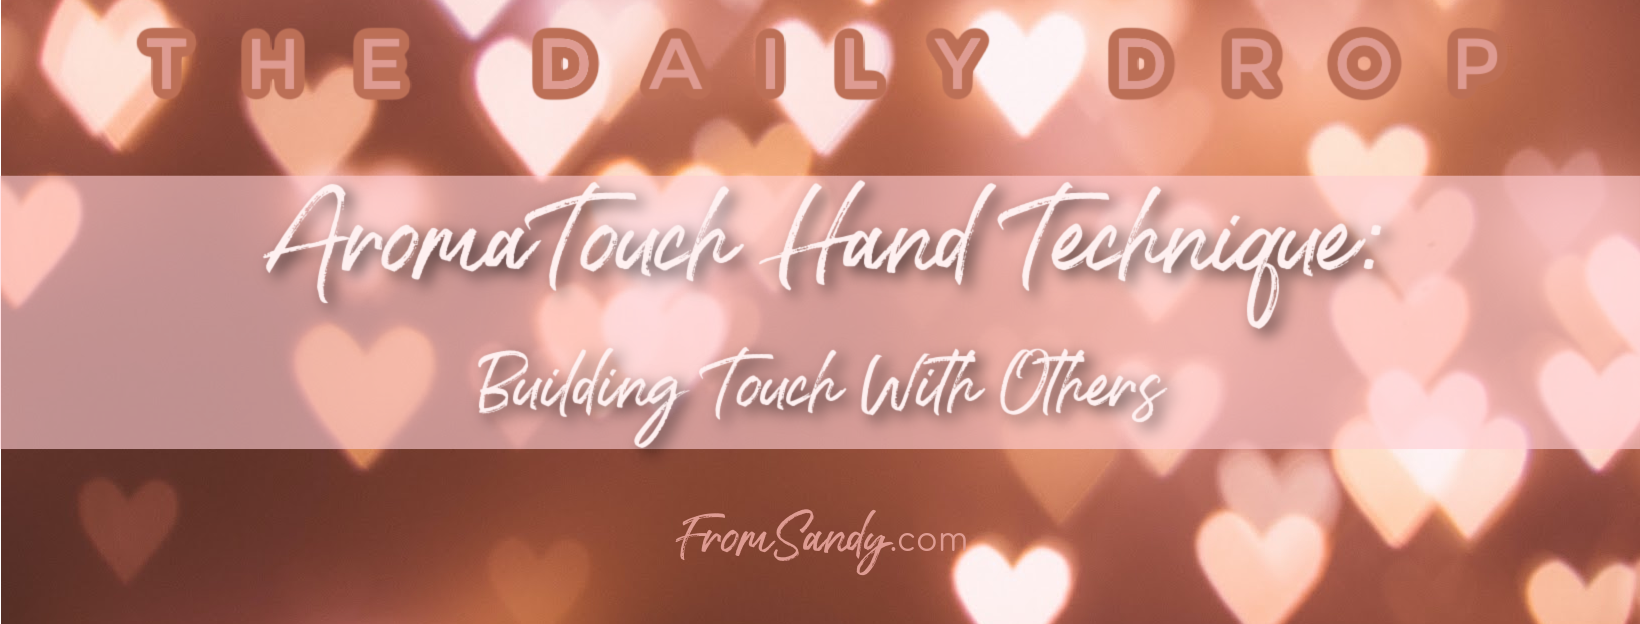 AromaTouch Hand Technique: Building Touch With Others, From Sandy